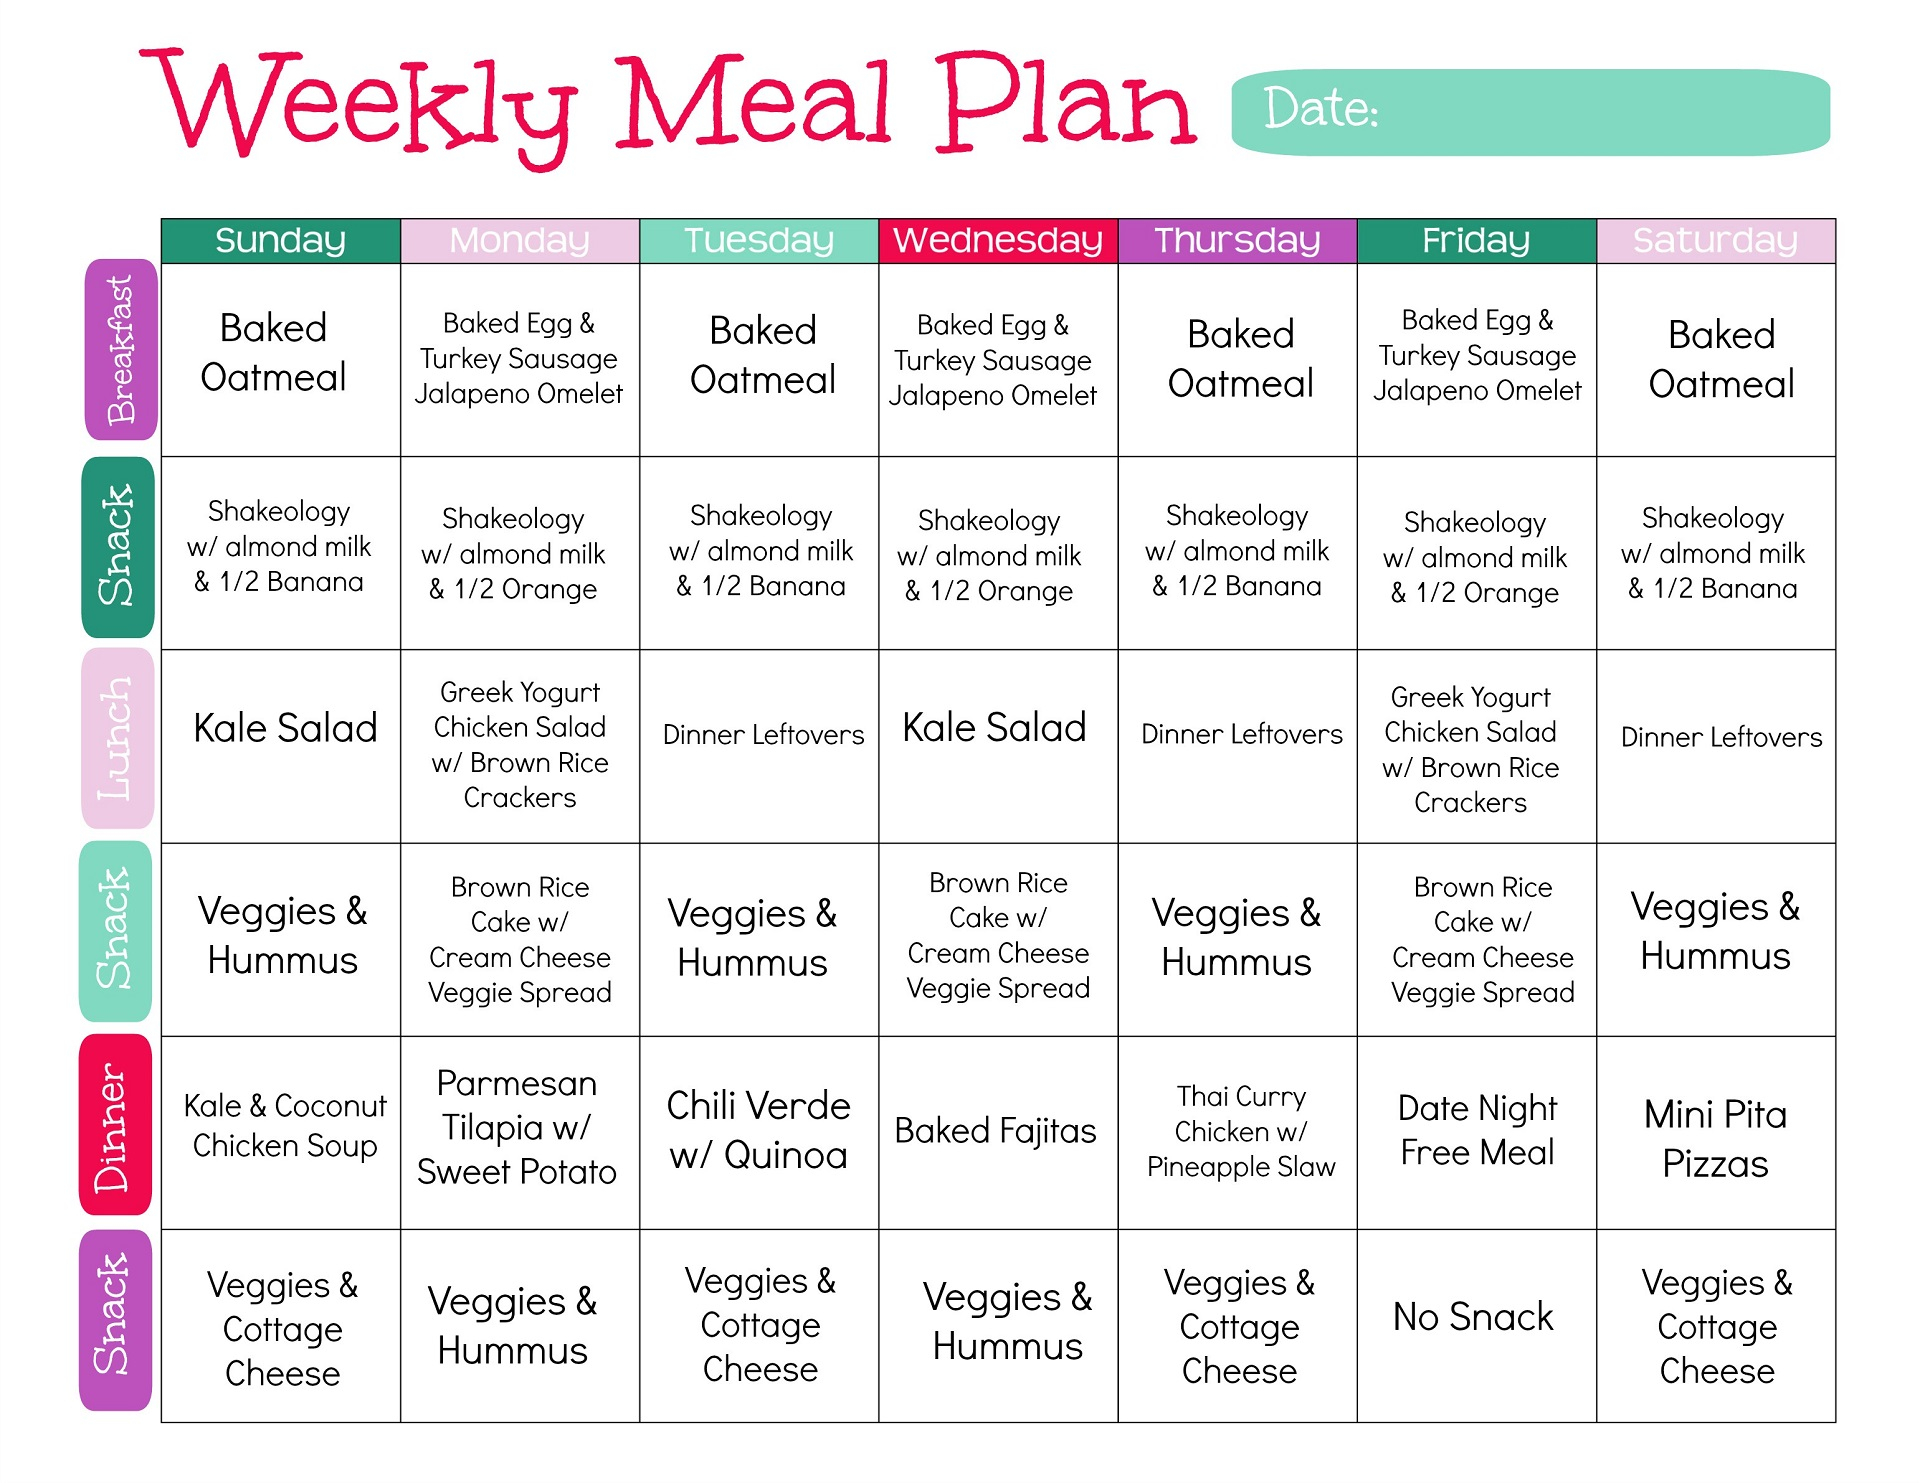 list at least four steps to successful meal planning